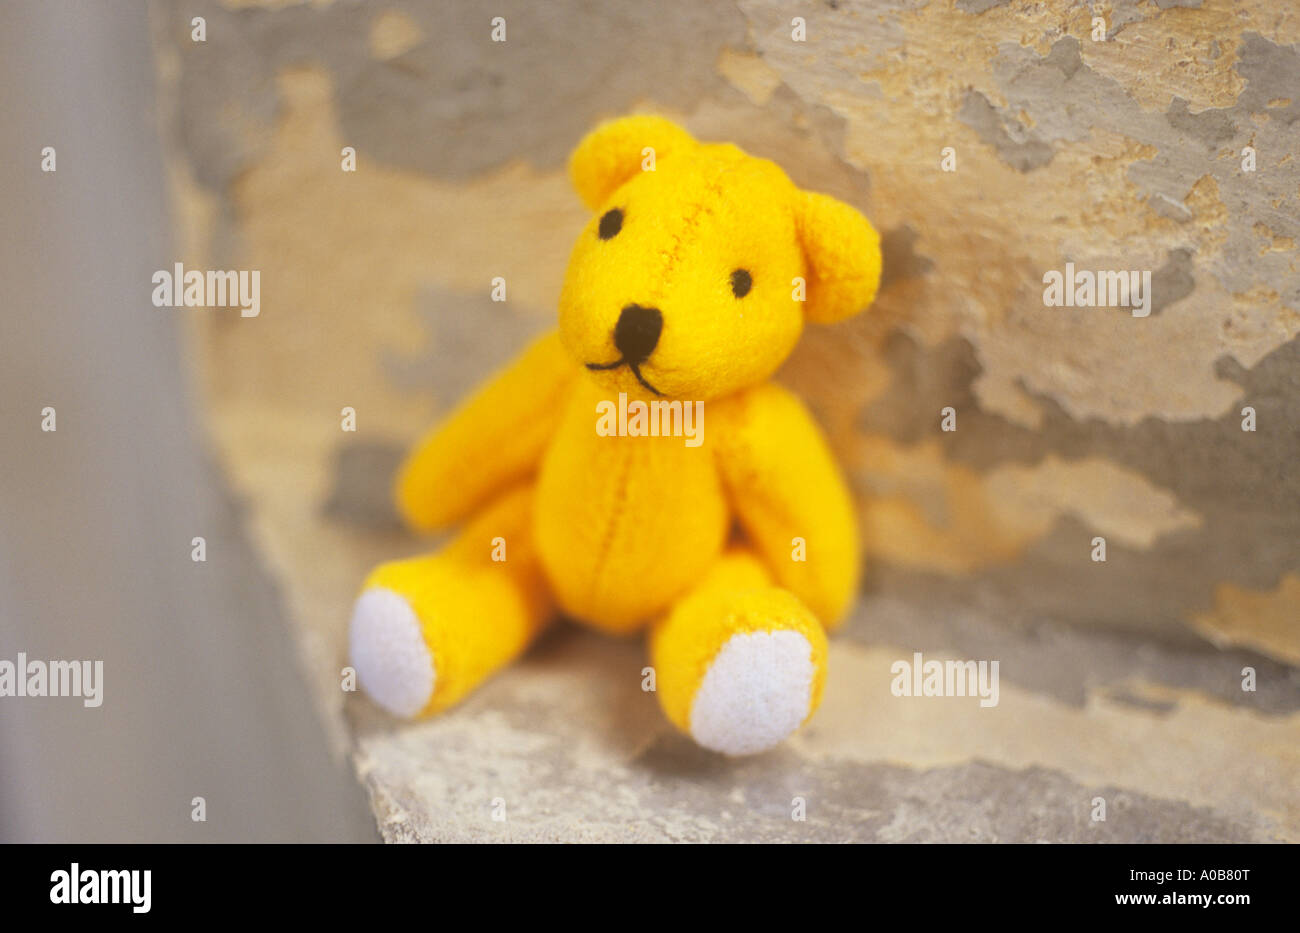 Small yellow teddy bear looking forlorn and sitting near the edge of a plastered flaking cream painted window alcove or seat Stock Photo